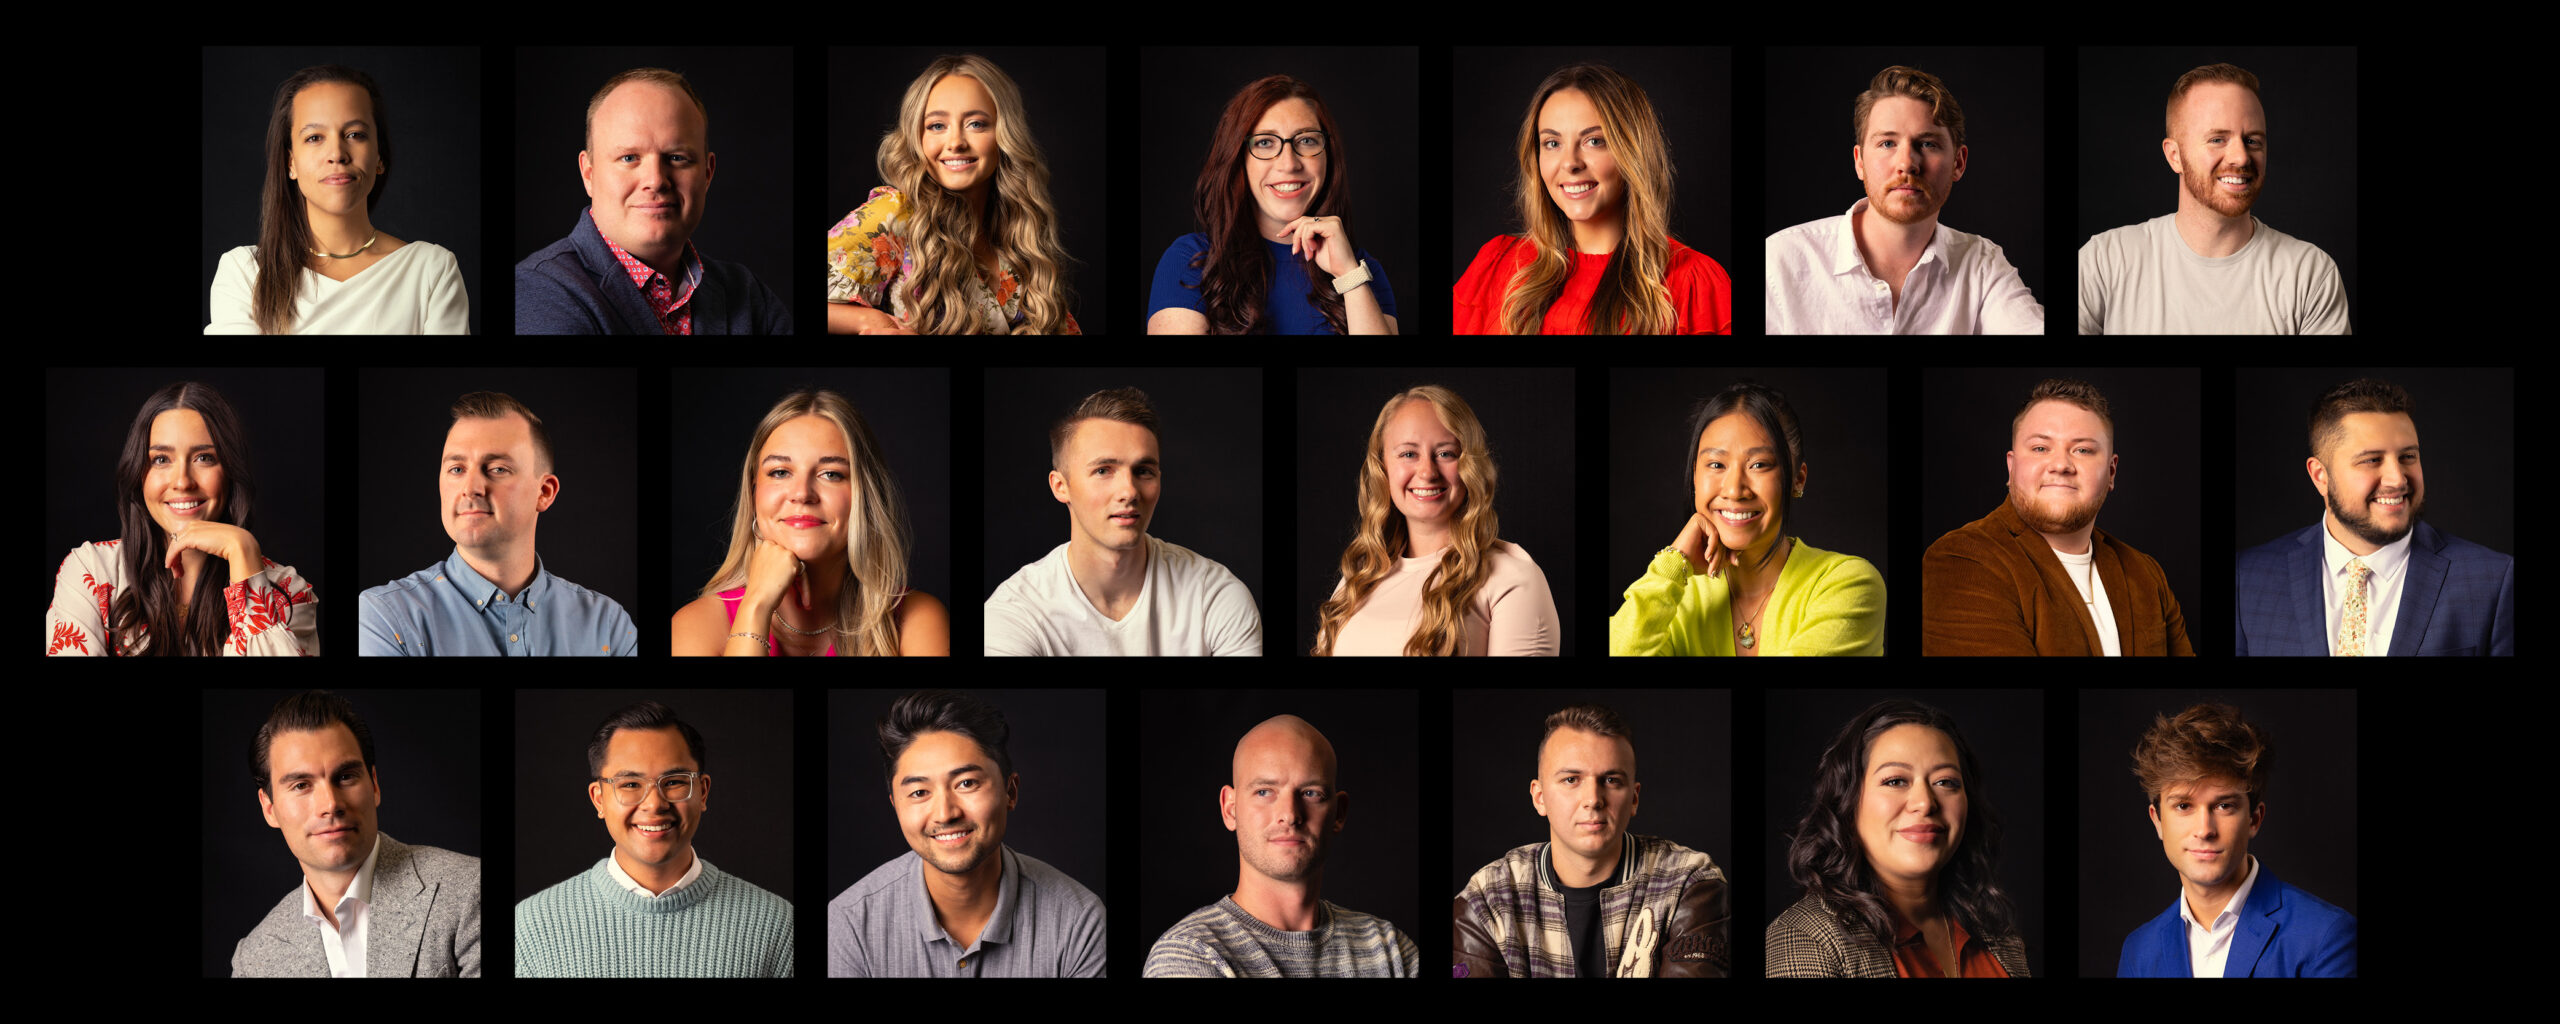 Say hello to the 2023 20 In Their 20s, the next generation of entrepreneurs and professionals poised to redefine business in Utah.